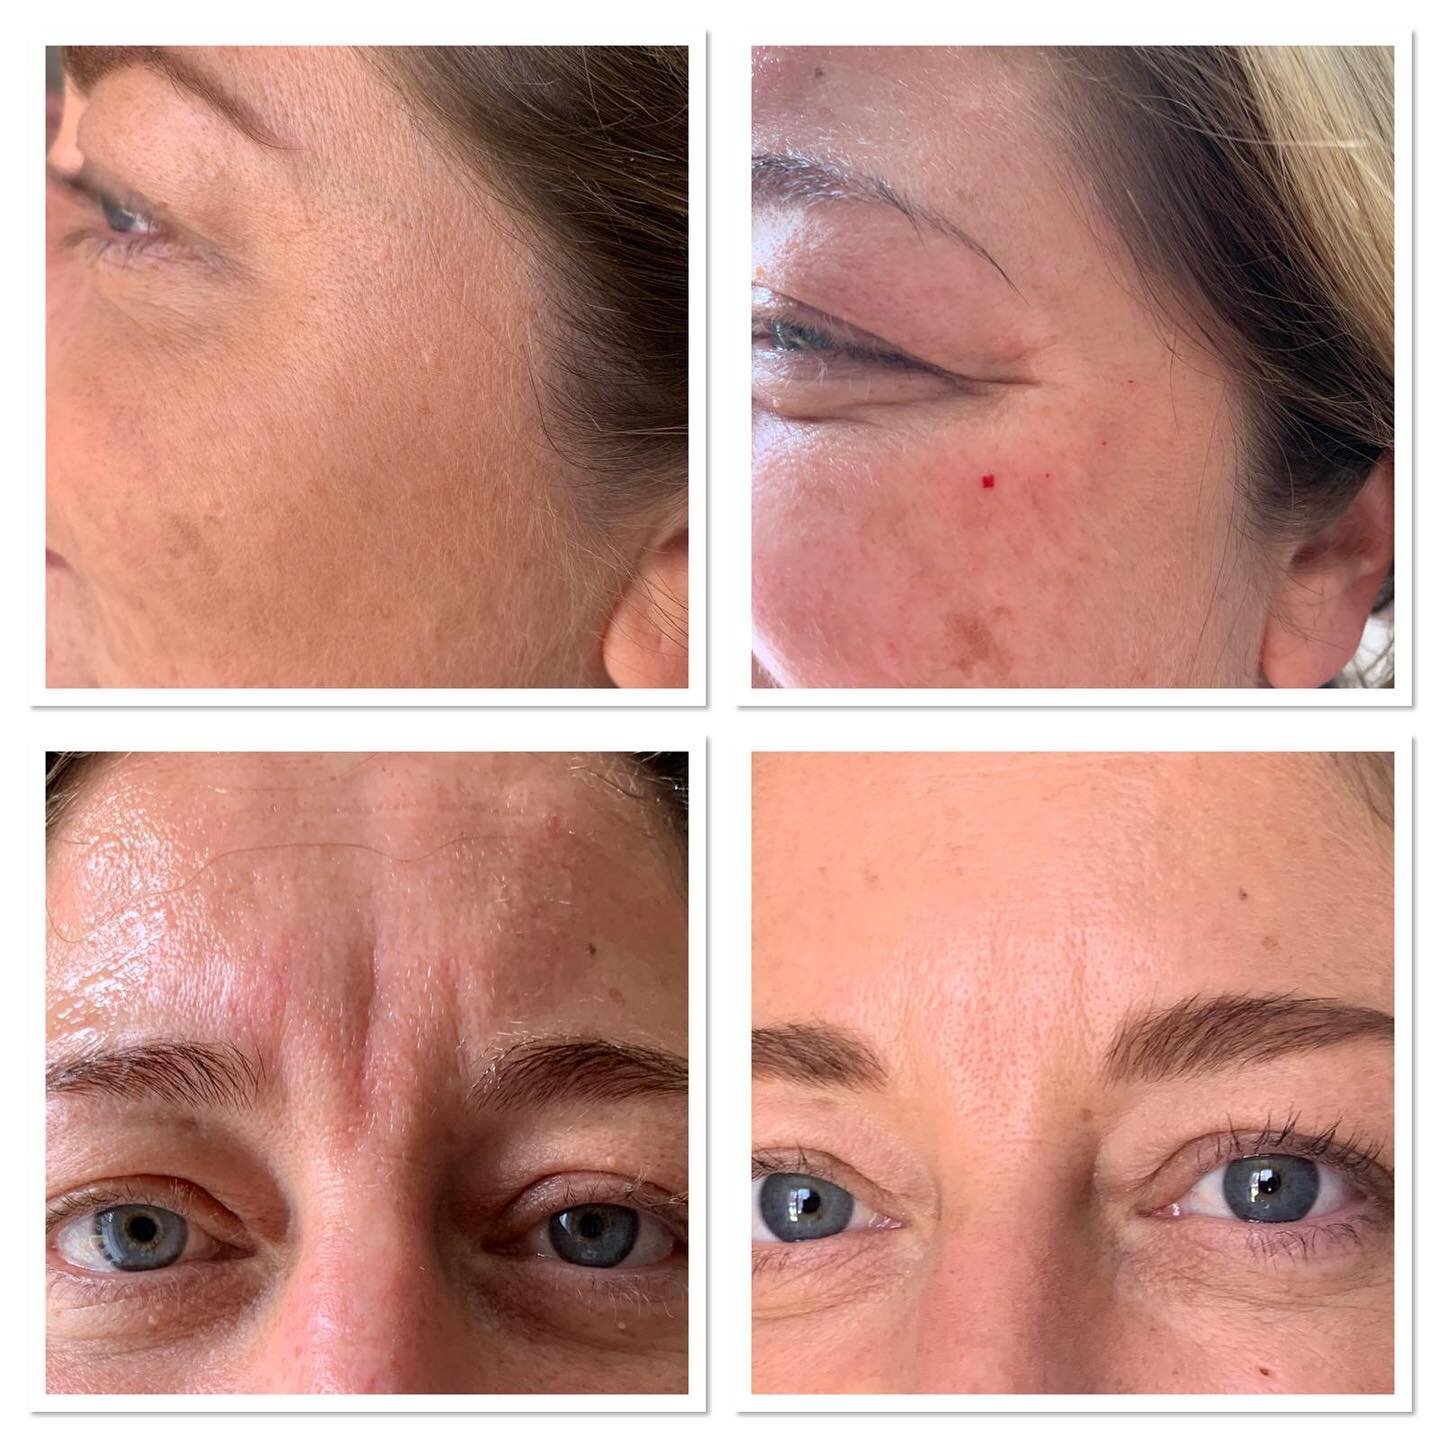 Some before and after photos of Anti-Wrinkle injections on three areas of the forehead and around the eyes.
.
.
#botox #antiwrinkle #frownlines #freshfaced #transformation